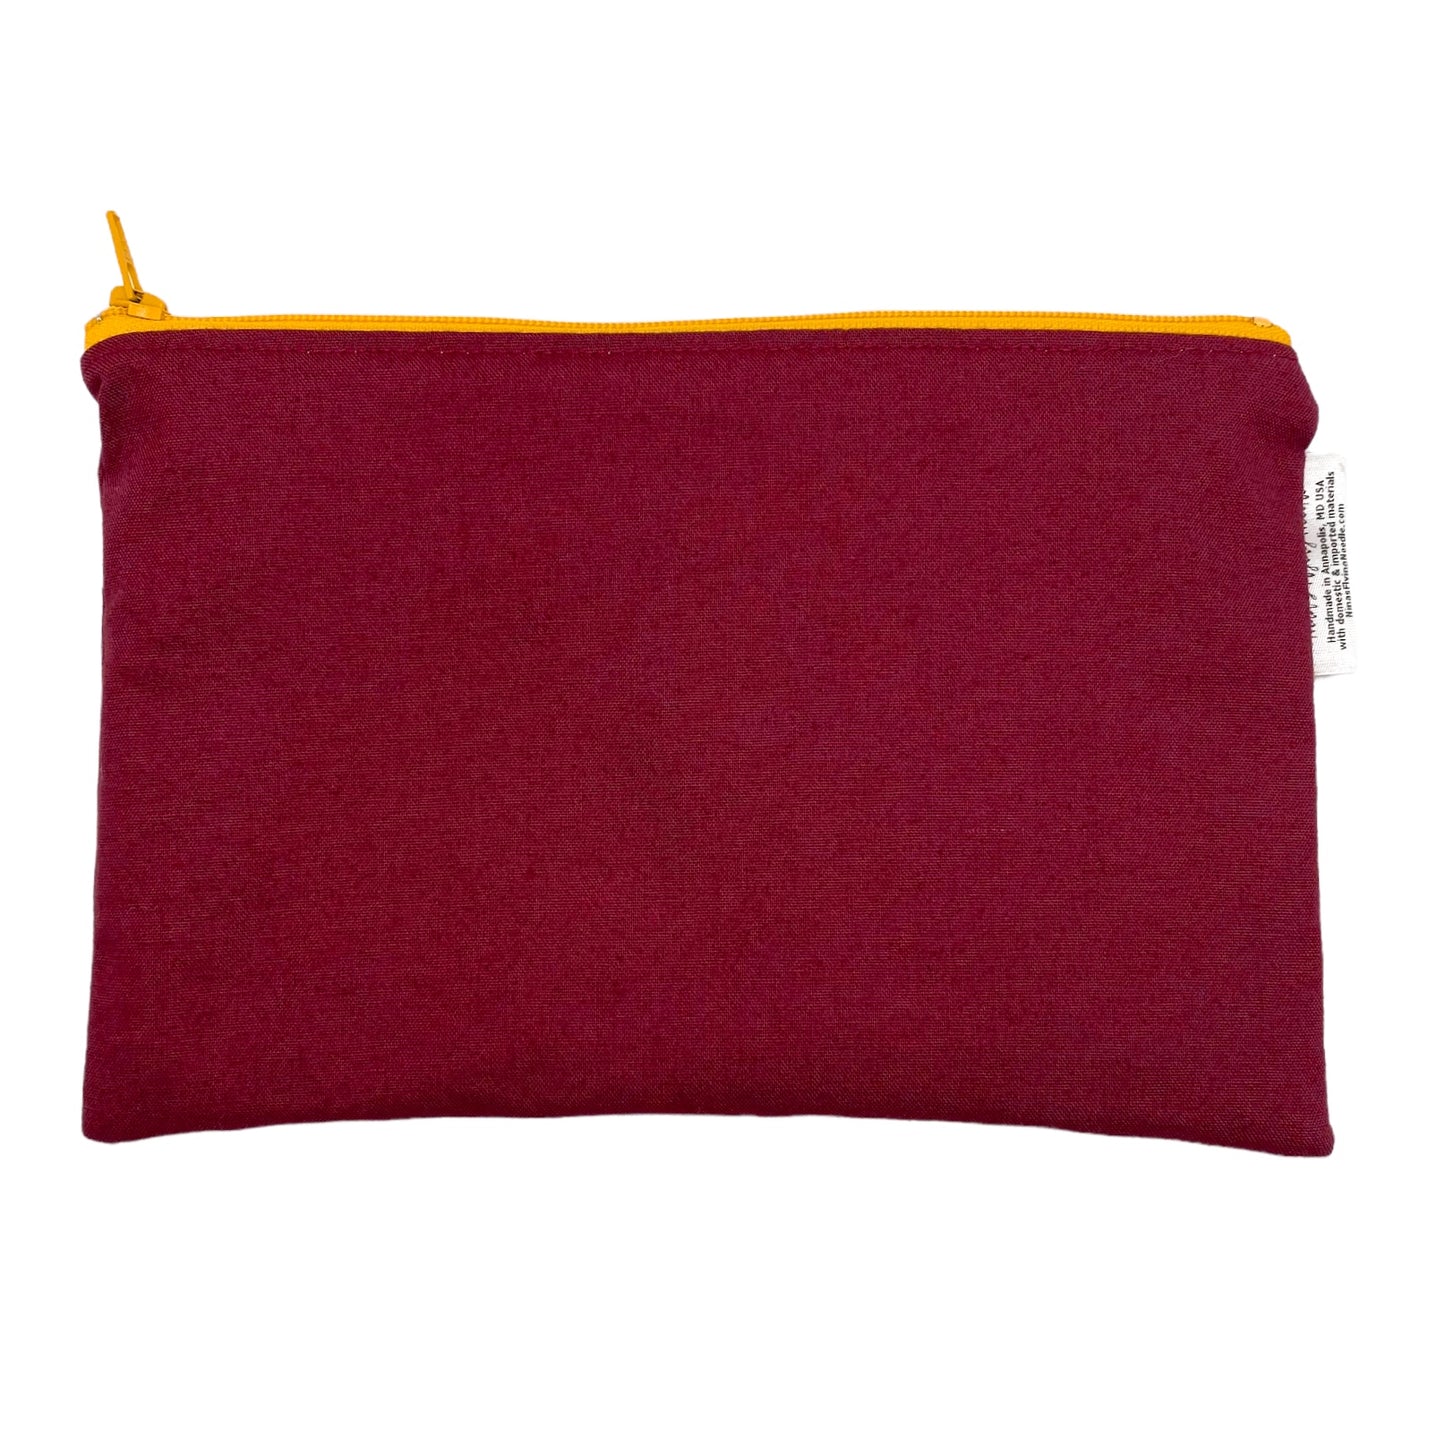 Snack Sized Reusable Zippered Bag Solid Maroon